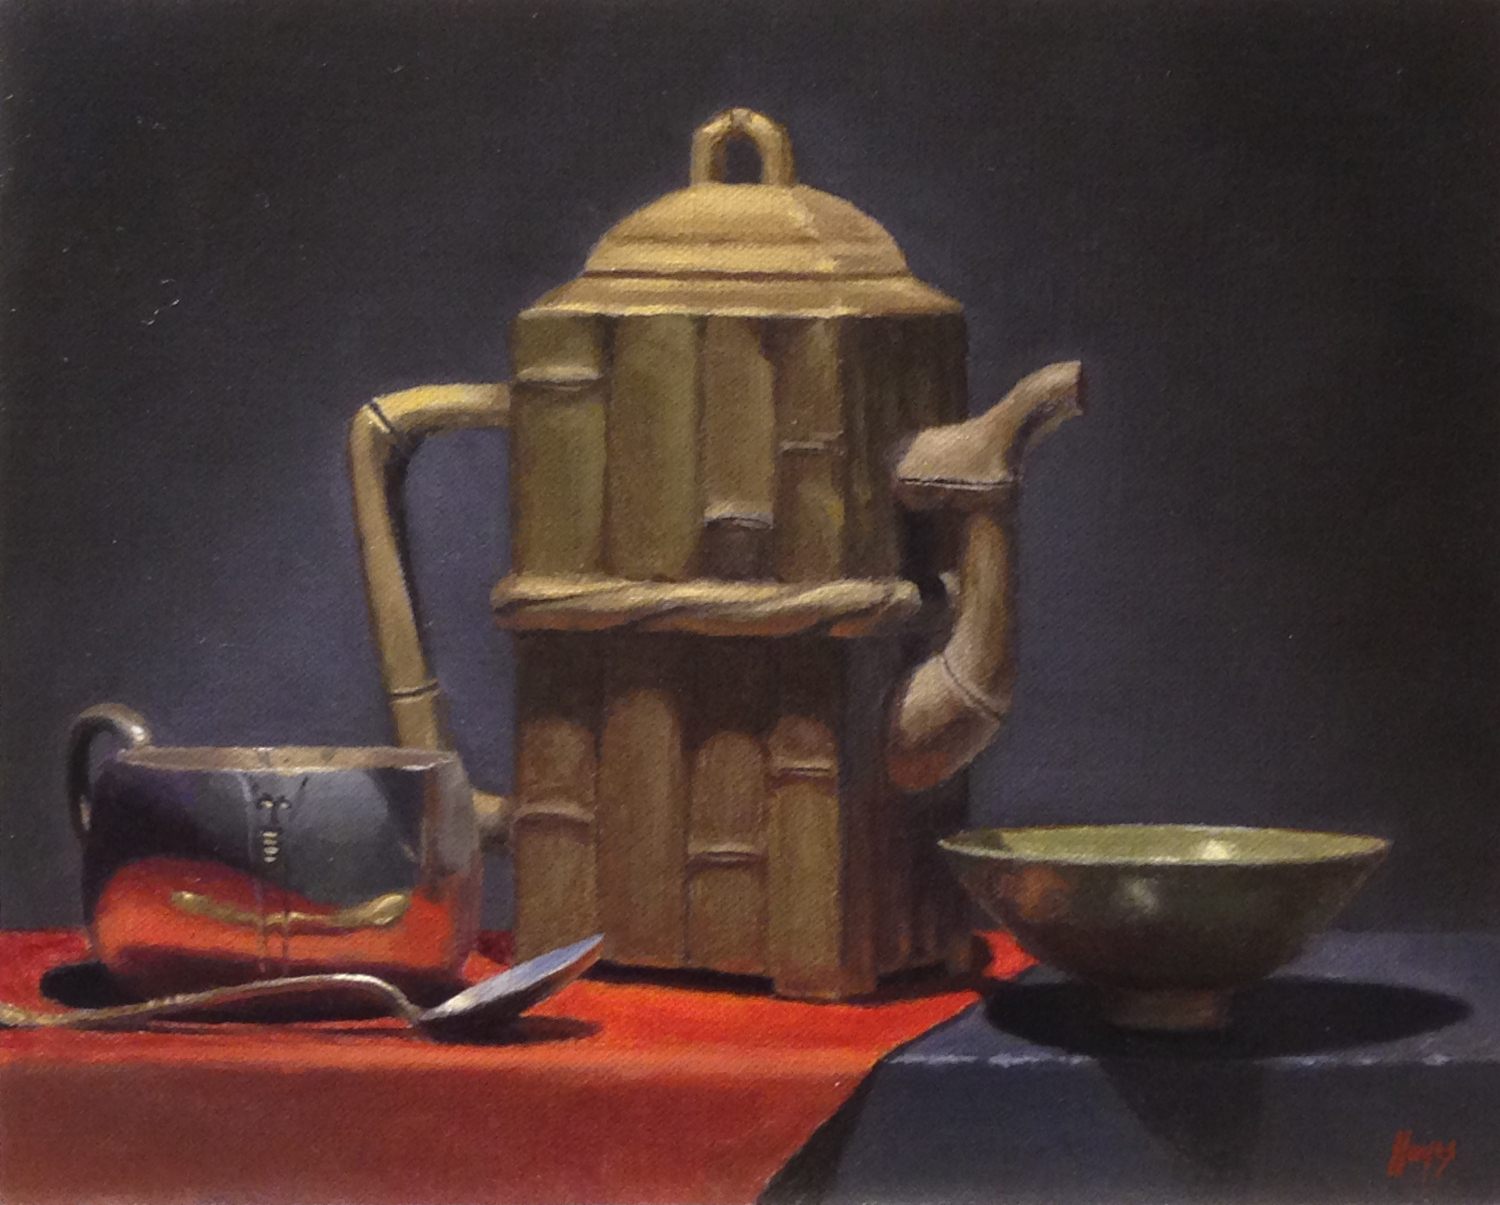 "Yixing Teapot, Silver, and Bowl"Oil on linen on panel, 8x10 inches, available